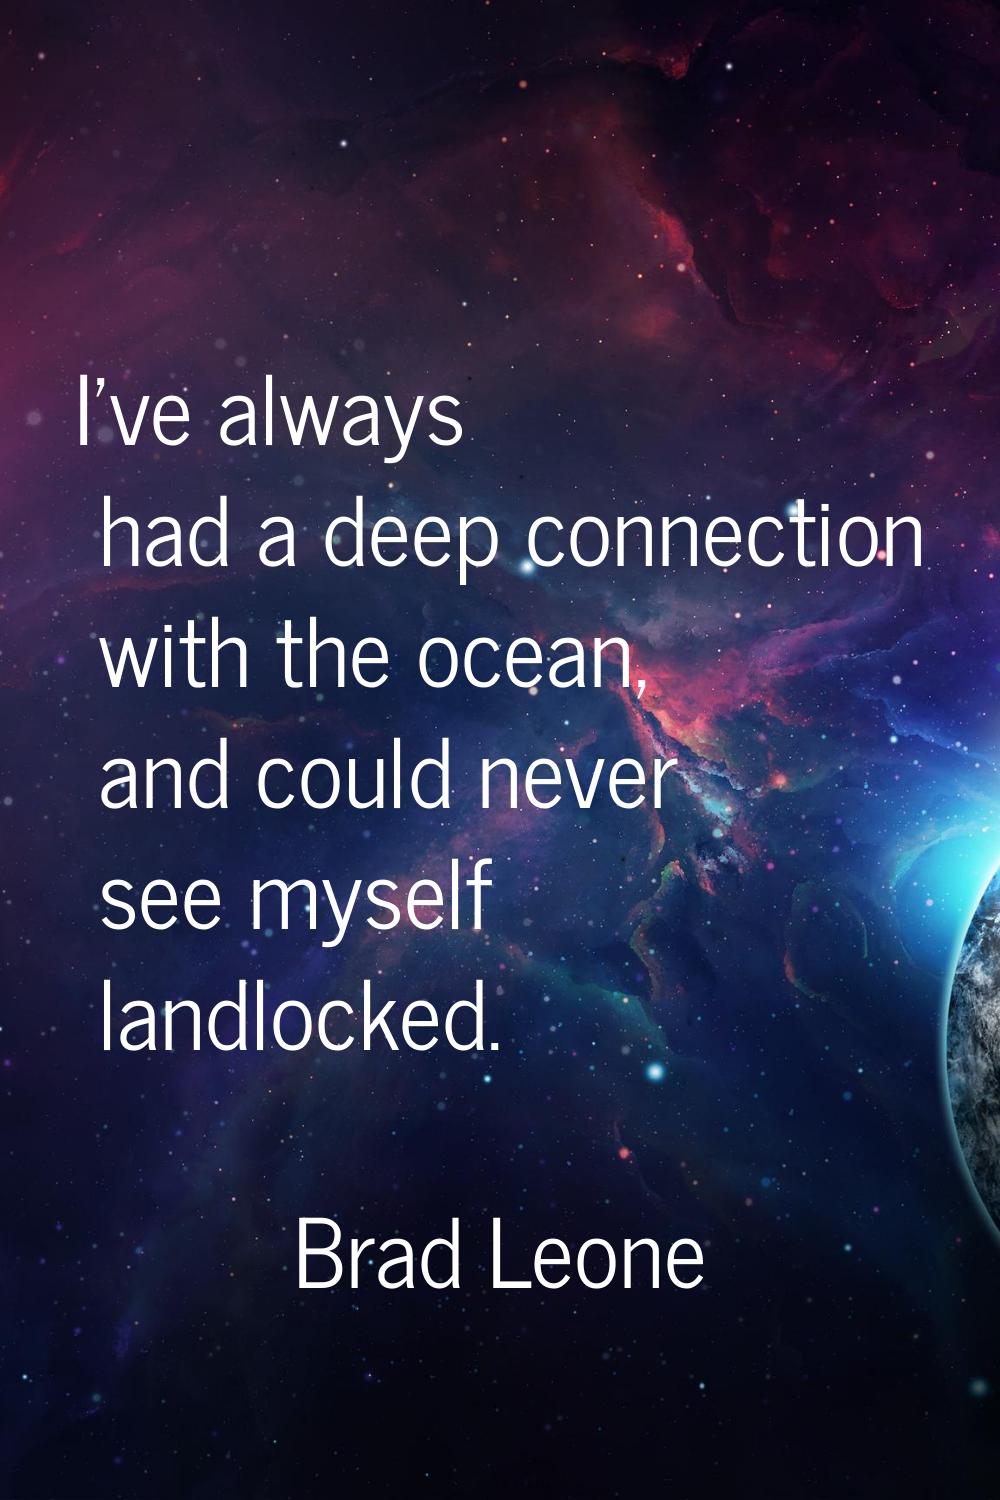 I've always had a deep connection with the ocean, and could never see myself landlocked.